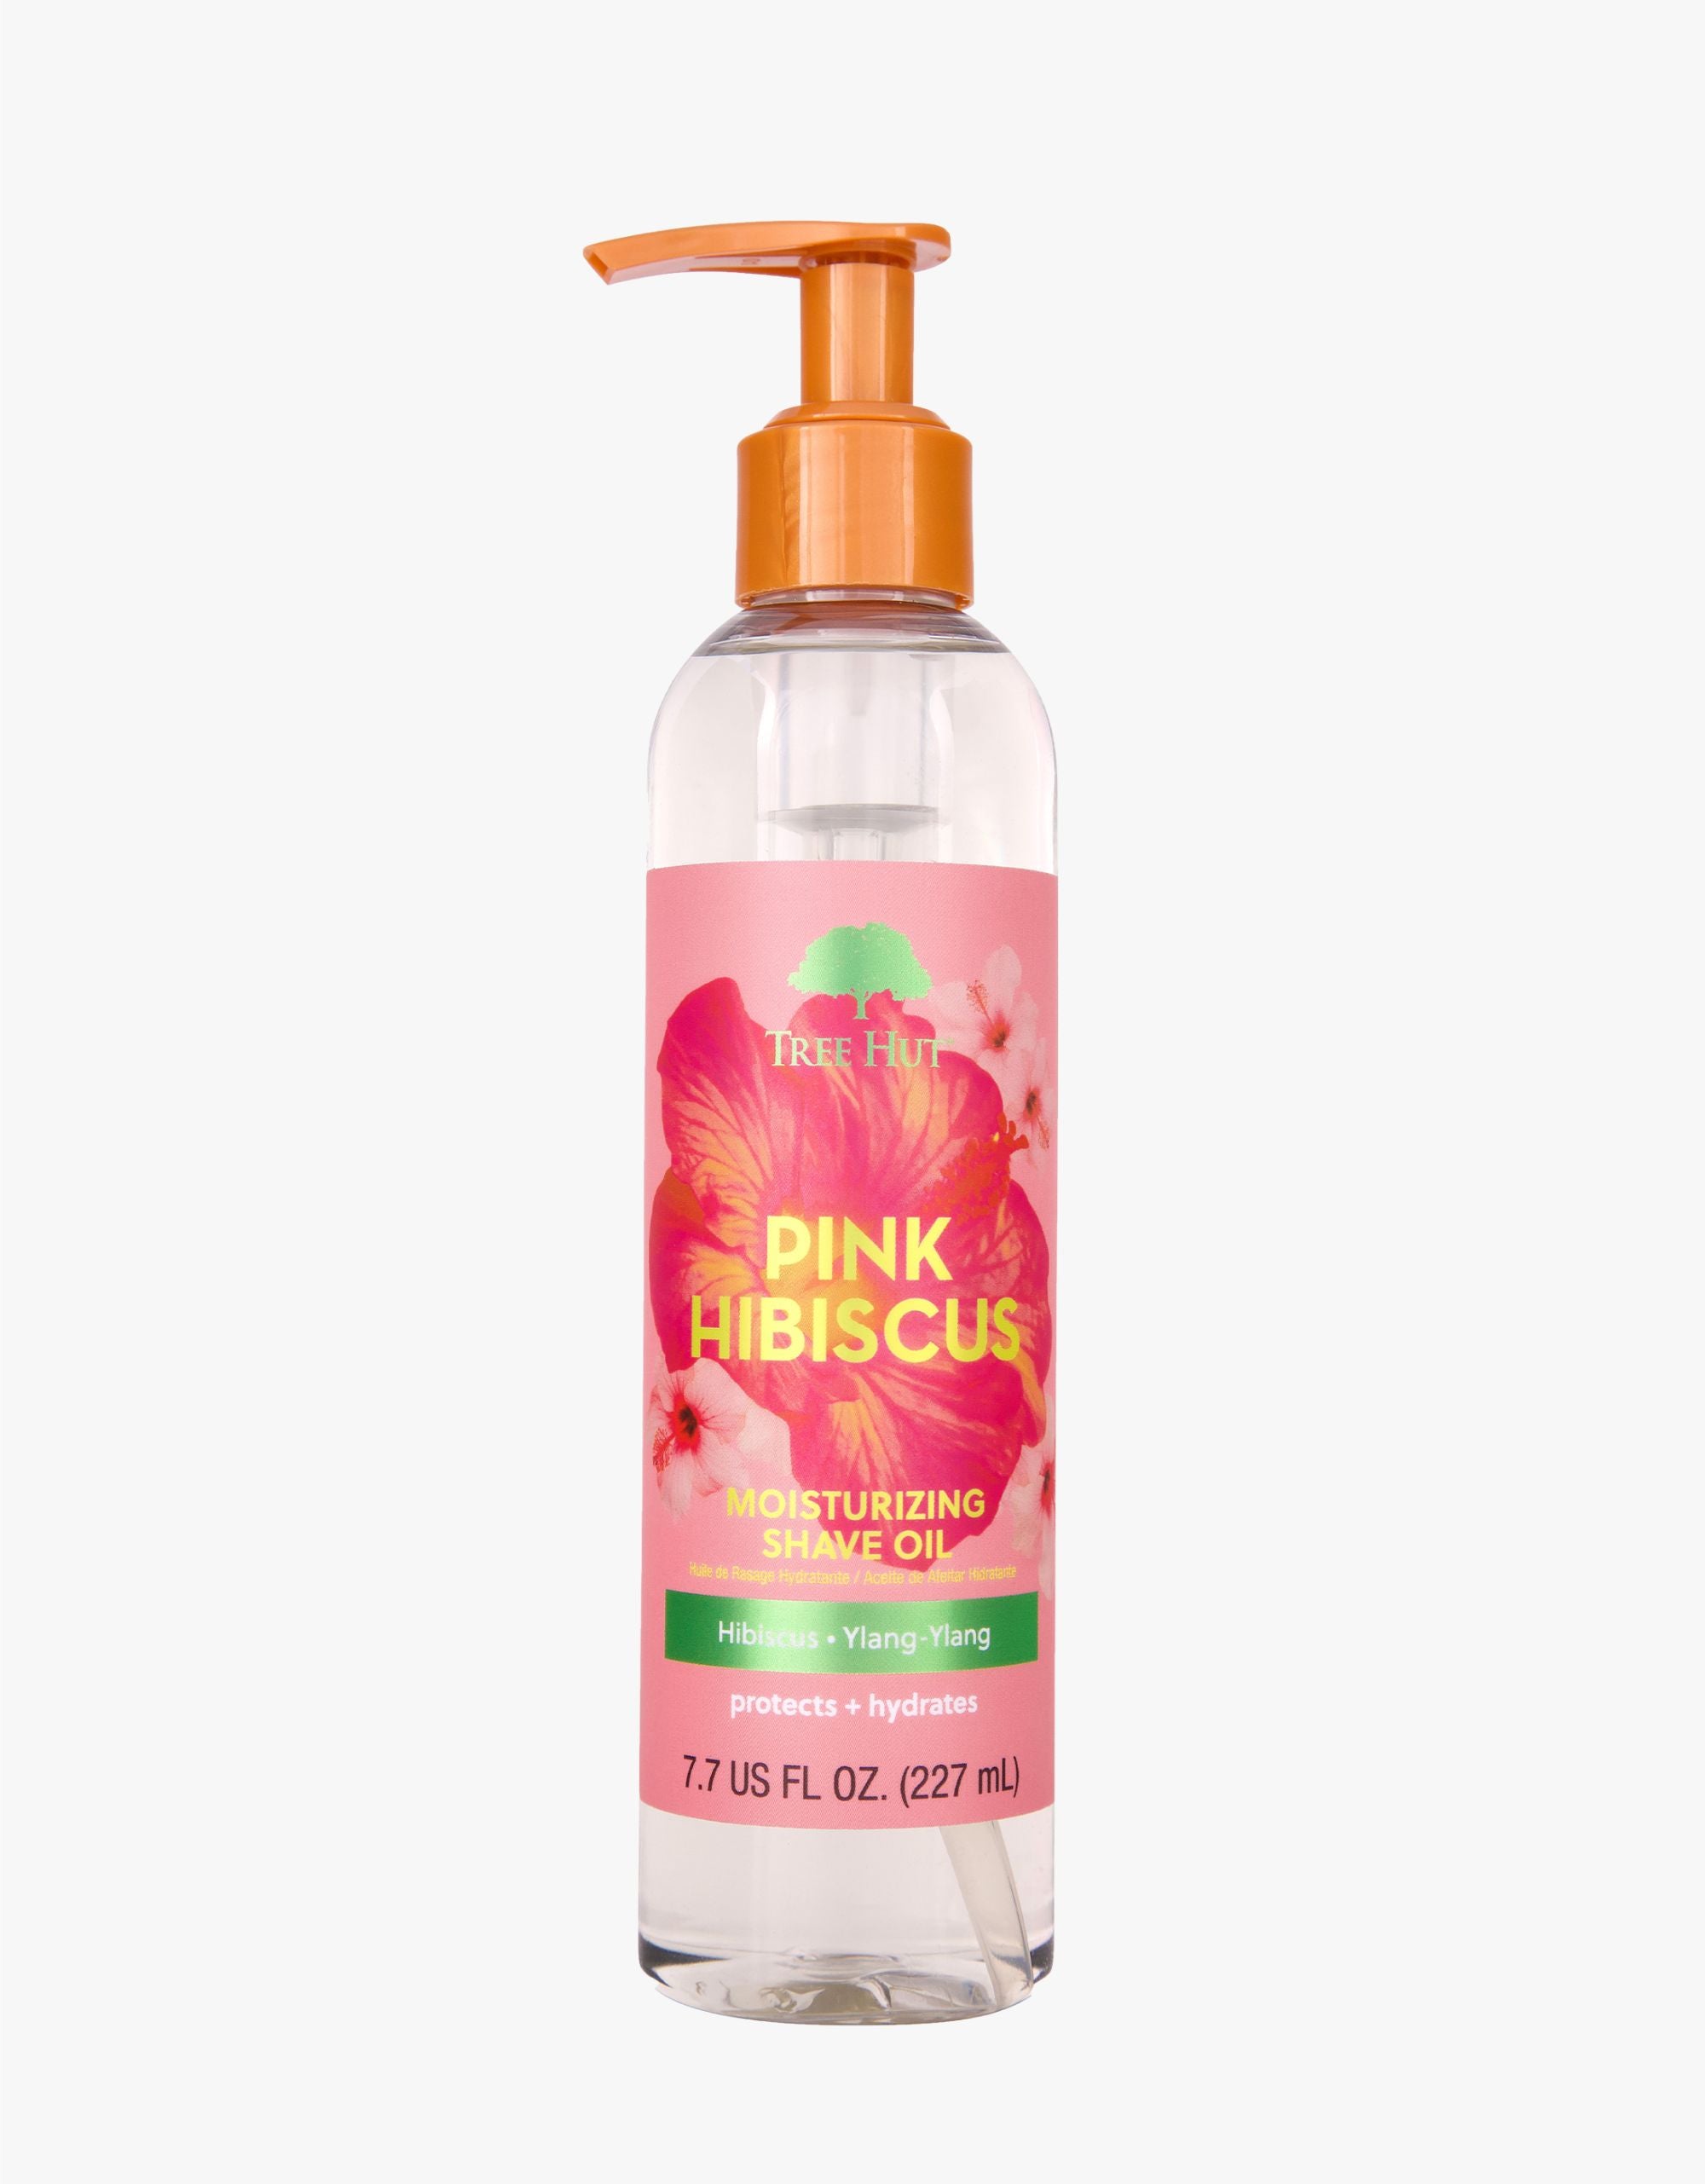 Pink Hibiscus Moisturizing Shave Oil